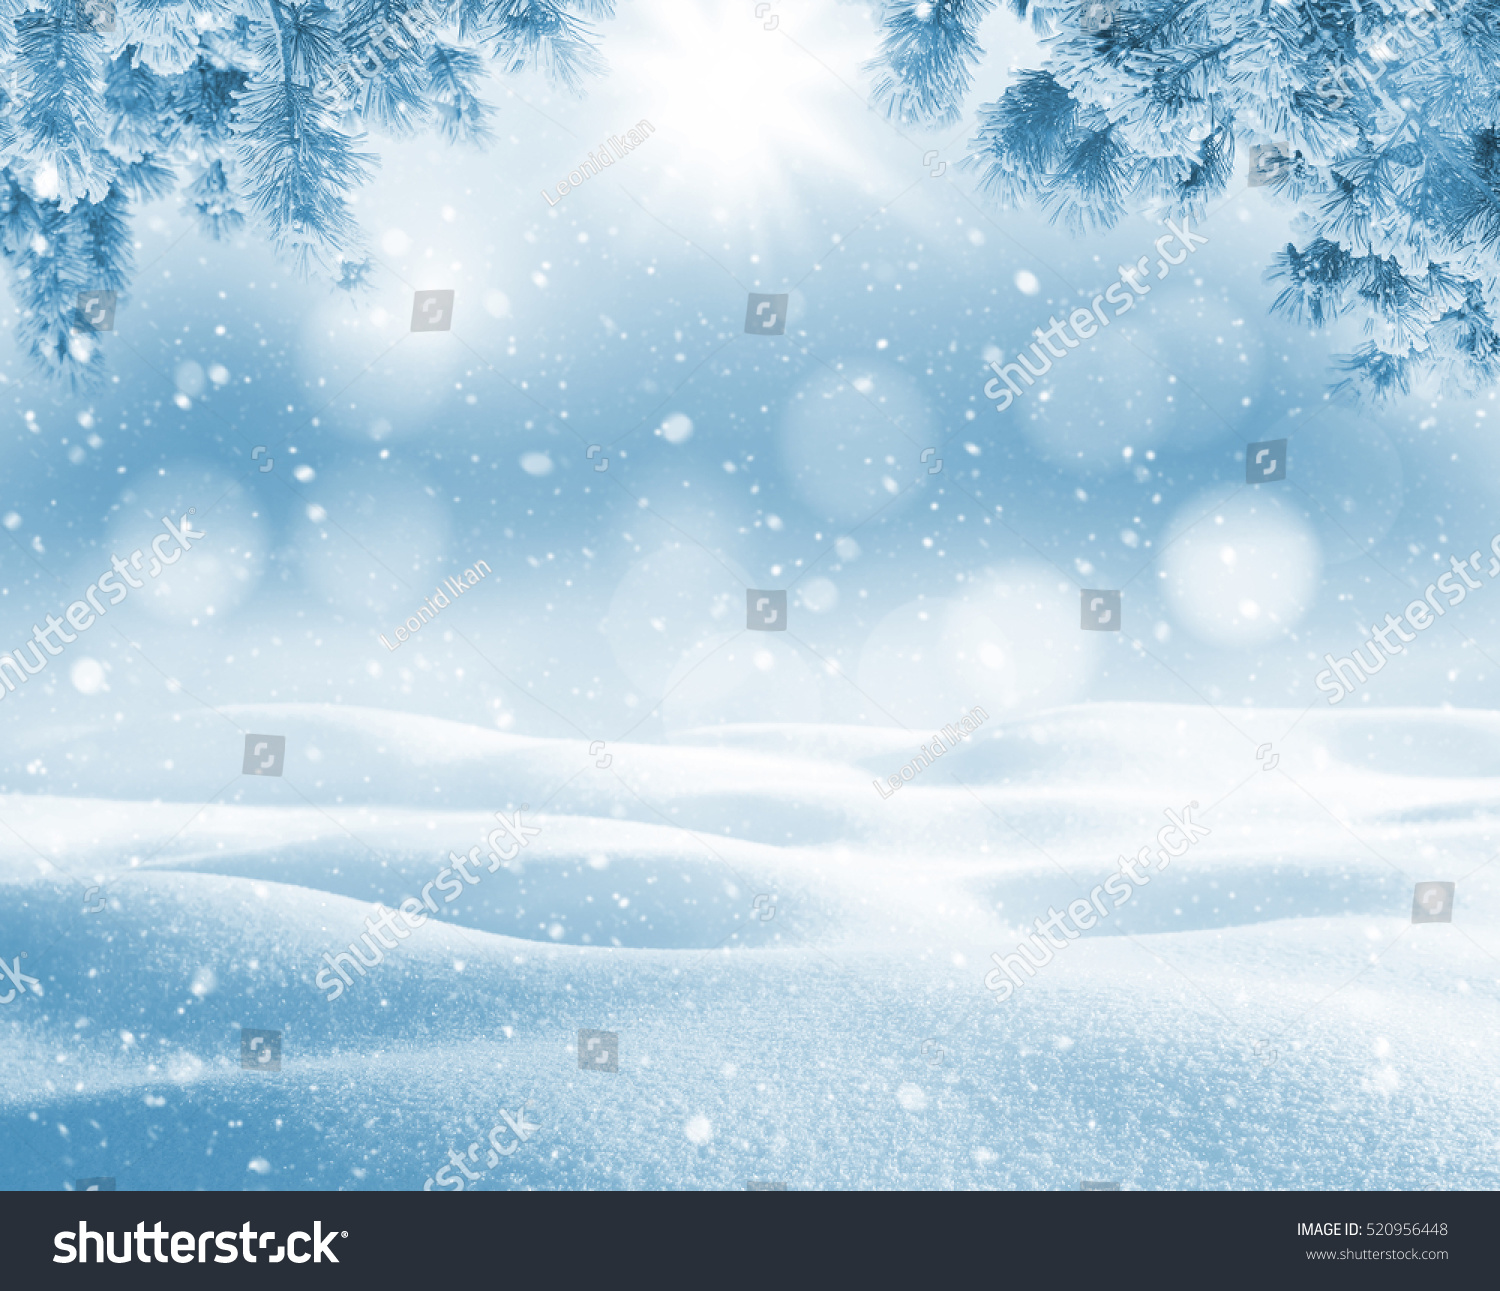 Winter bright background. Christmas landscape with snowdrifts and pine branches in the frost. #520956448